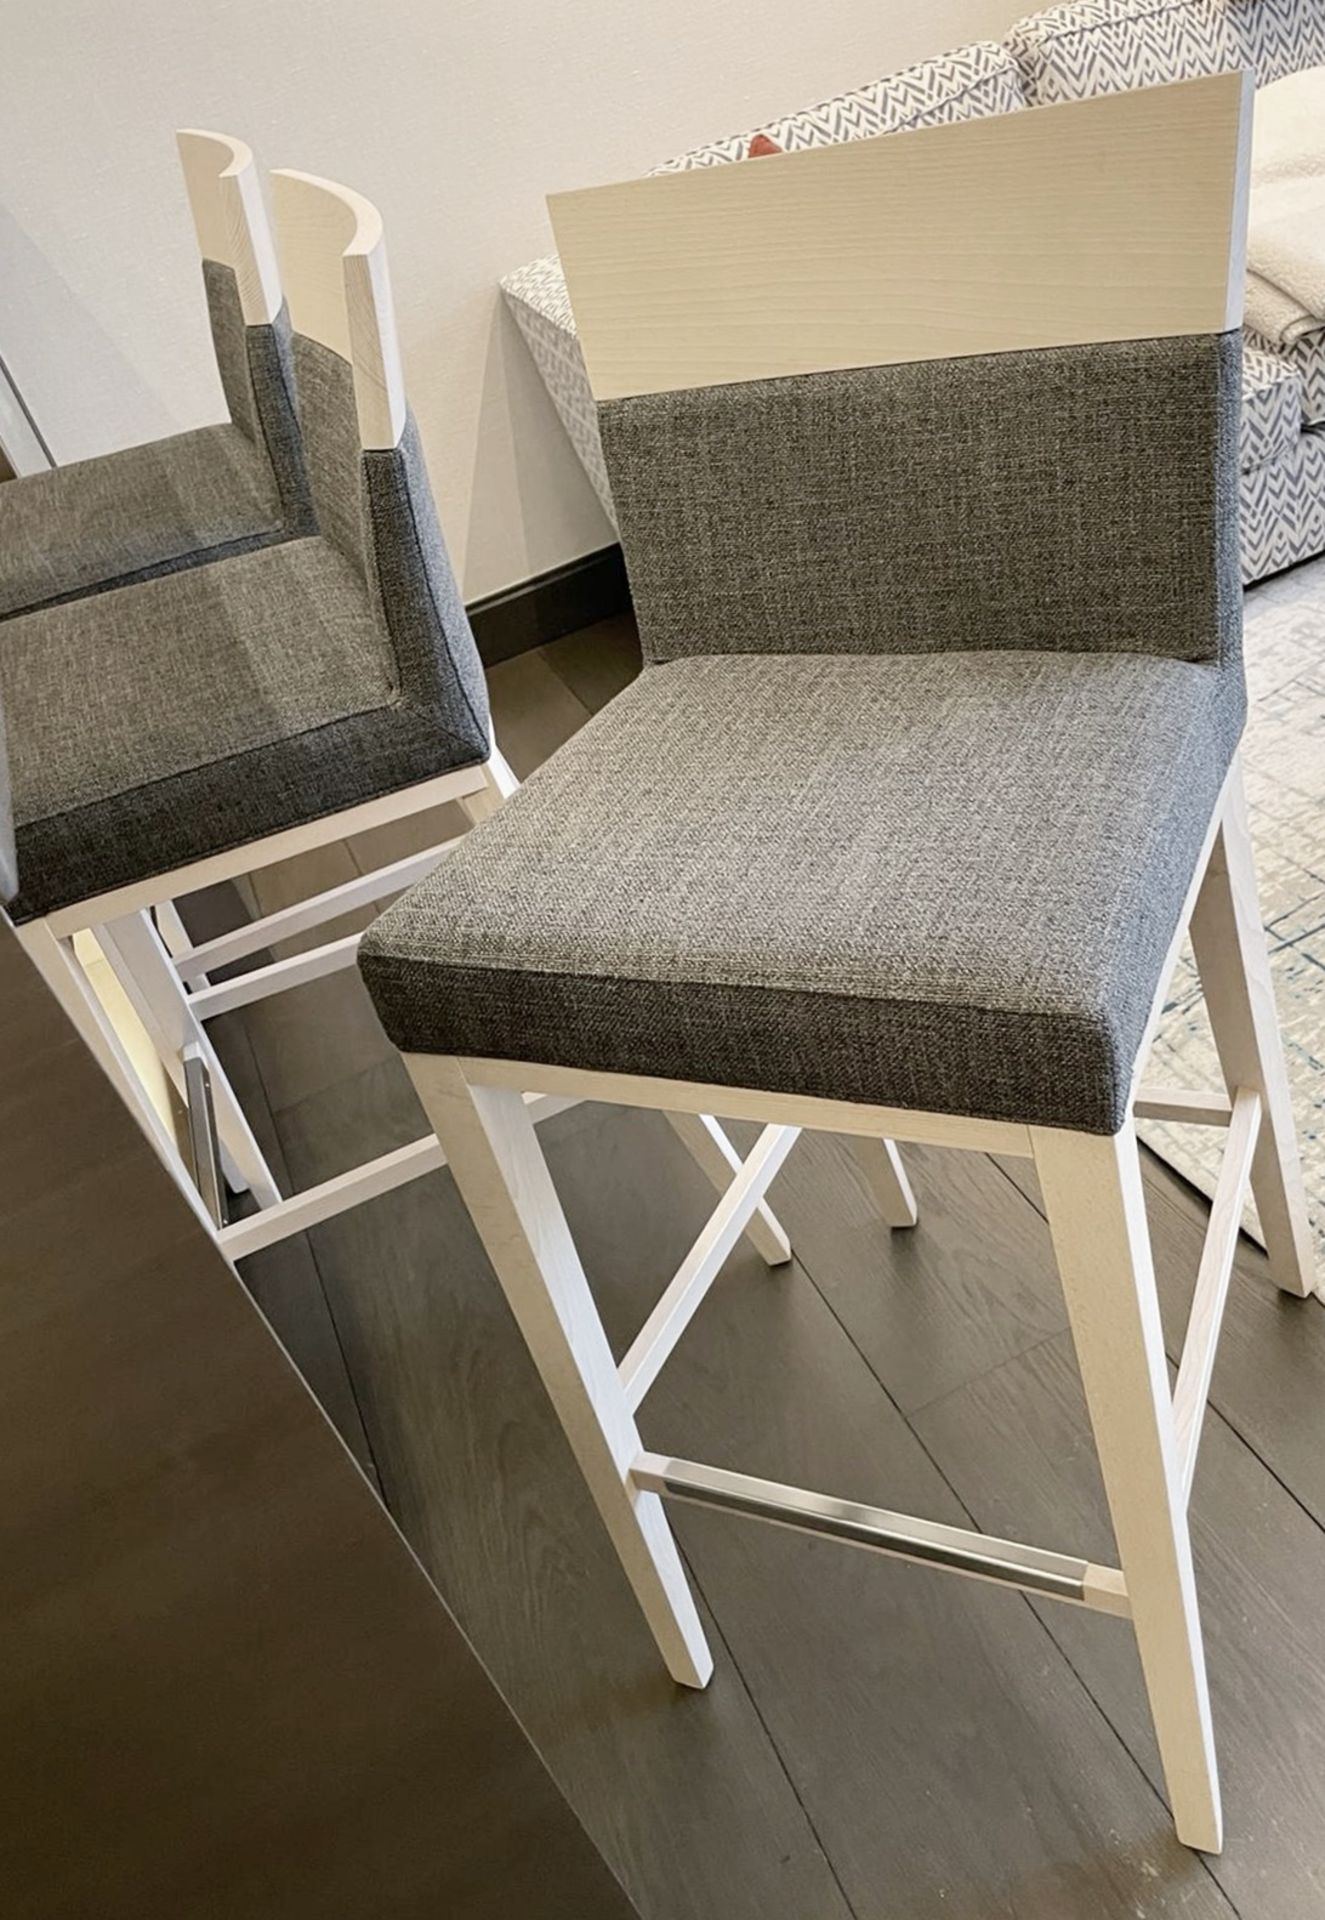 3 x MONTBEL Designer Bar Stools With Light Stained Frames And Grey Fabric Upholstery - Image 5 of 18